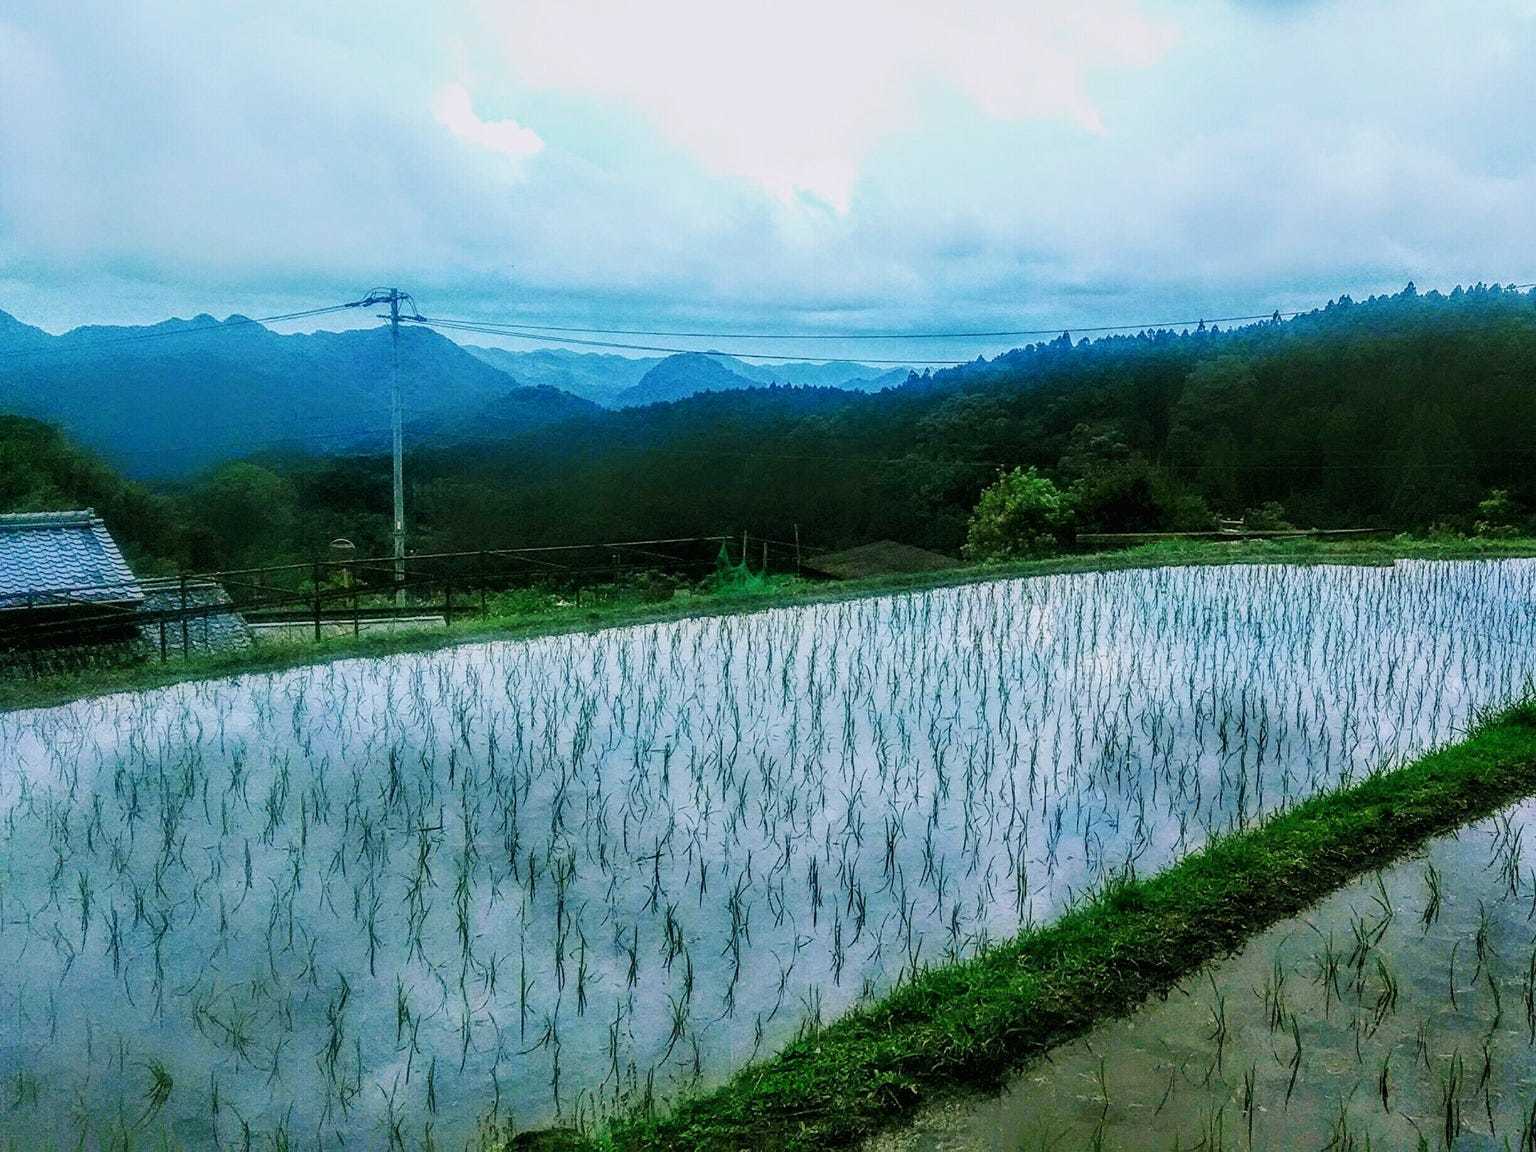 The rice paddy field at dusk outside of the Tokai